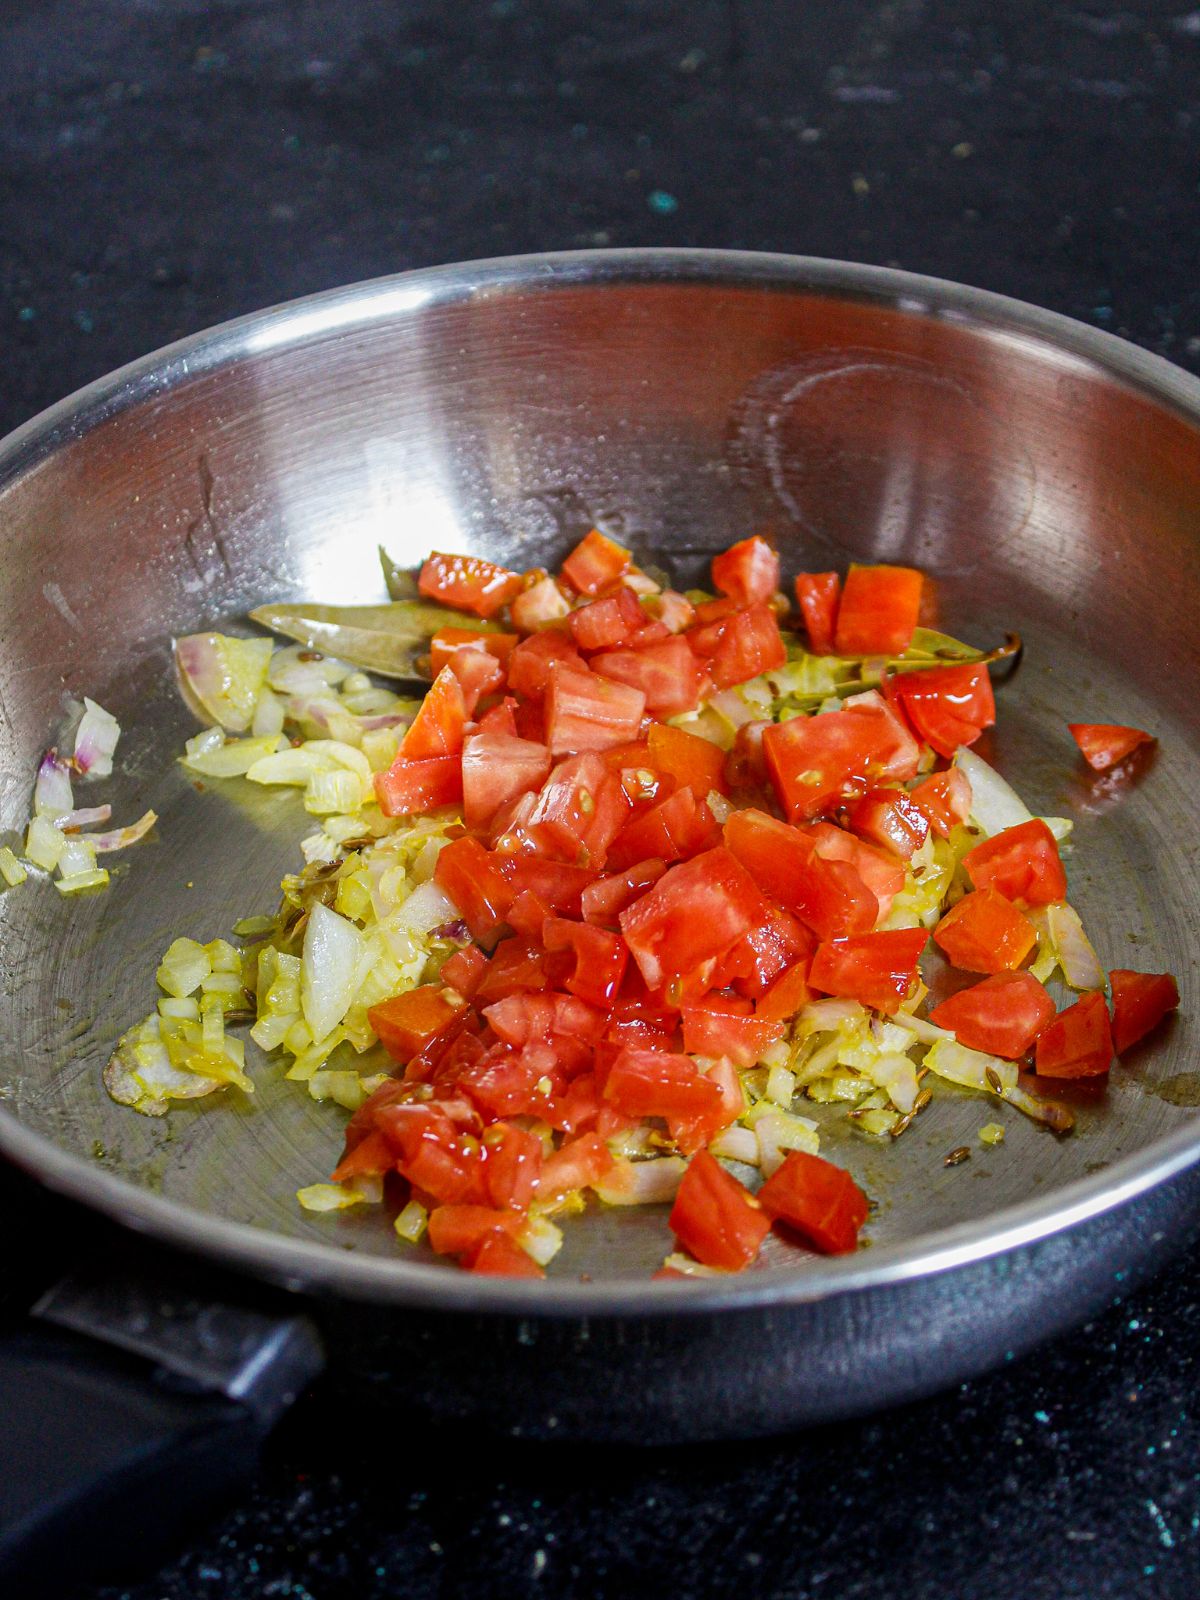 Add chopped tomatoes to the saute and mix well